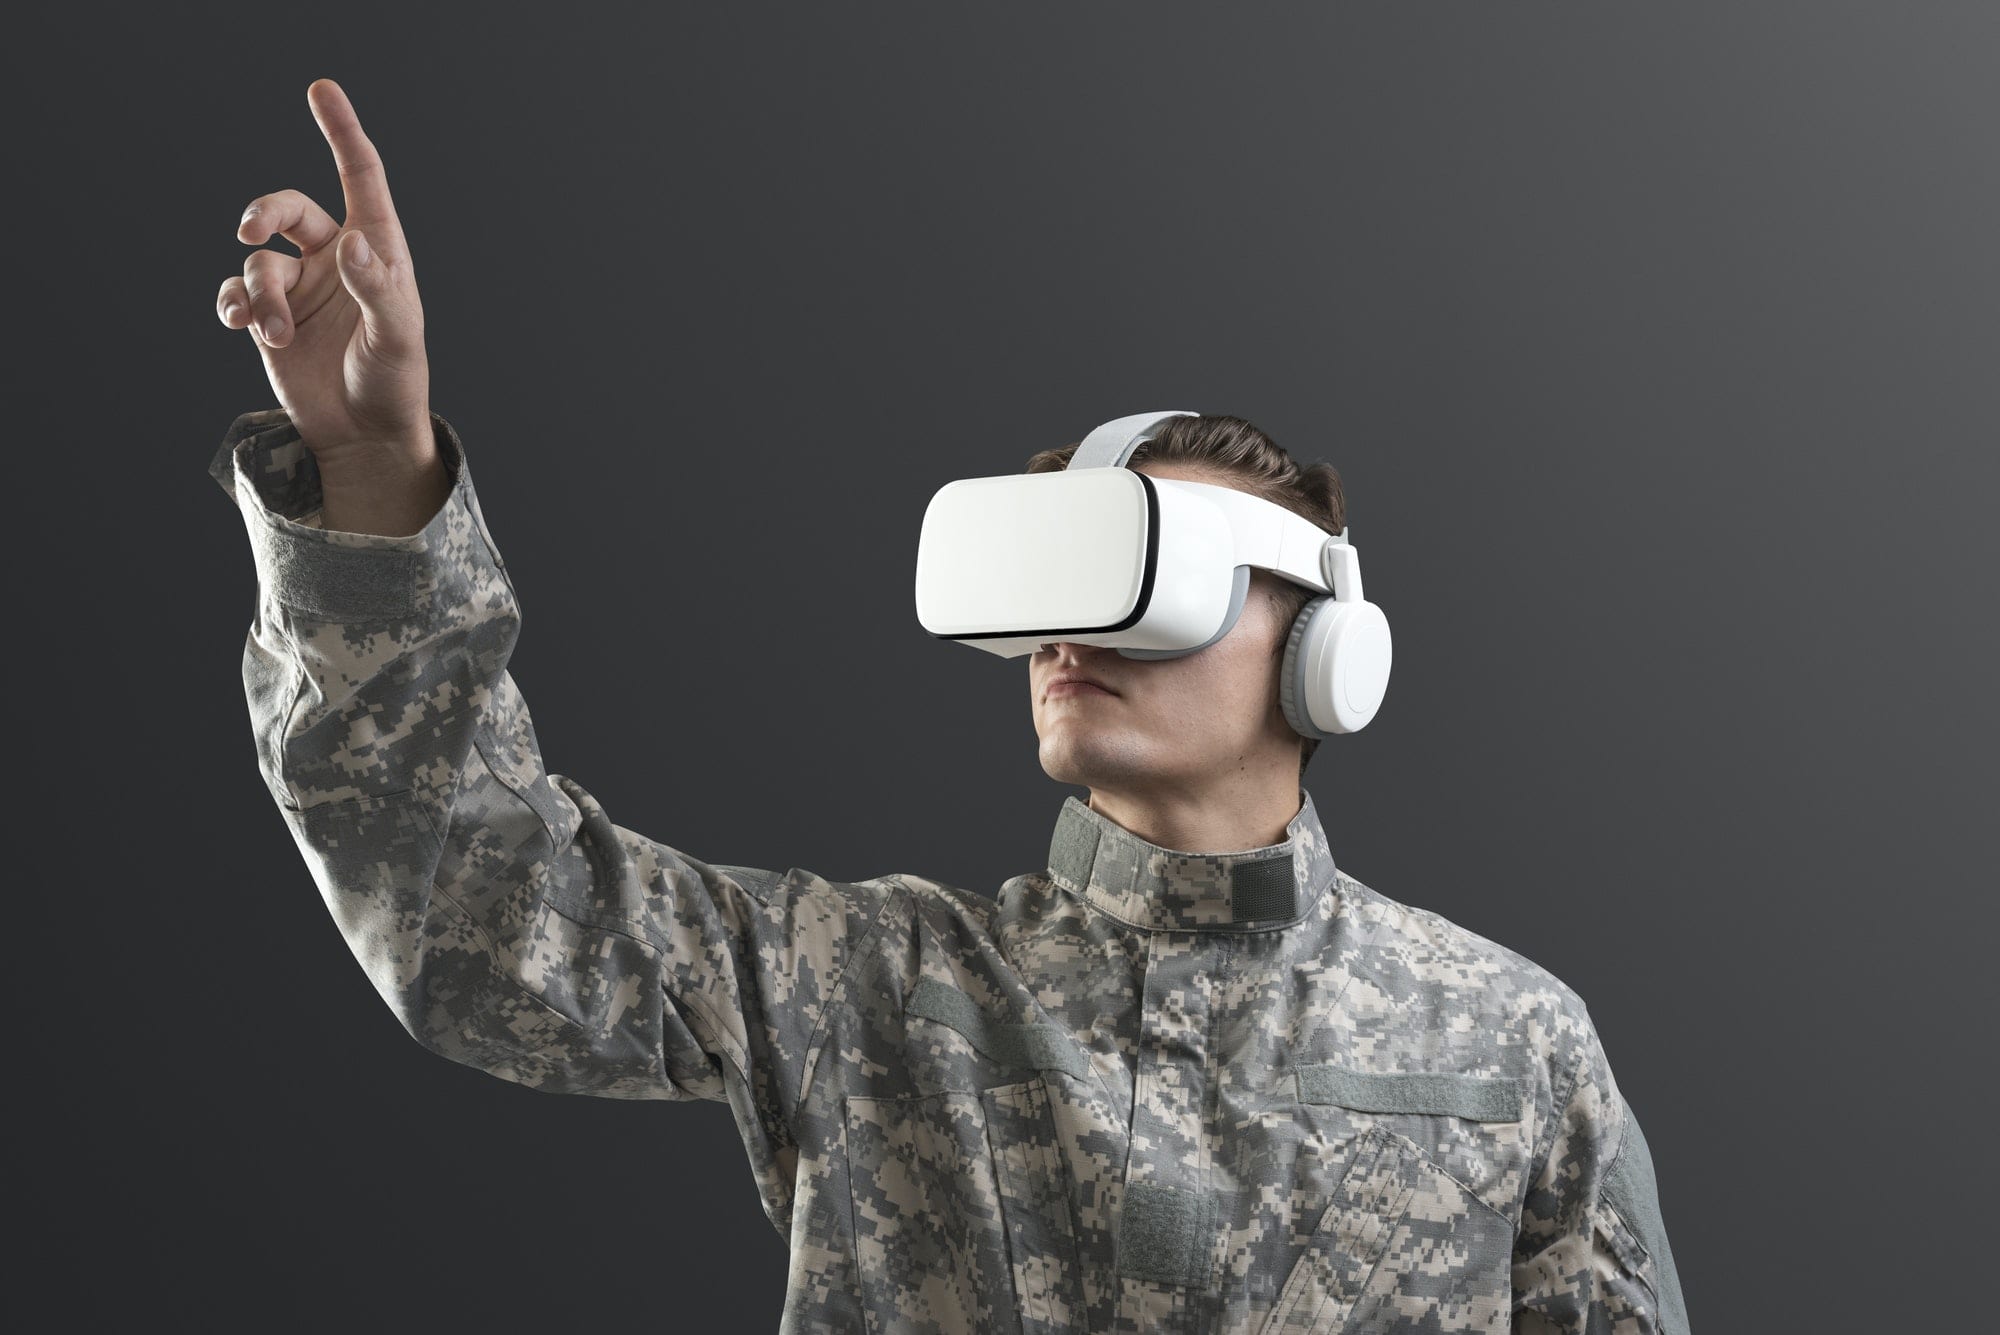 Military man with VR headset in training military technology